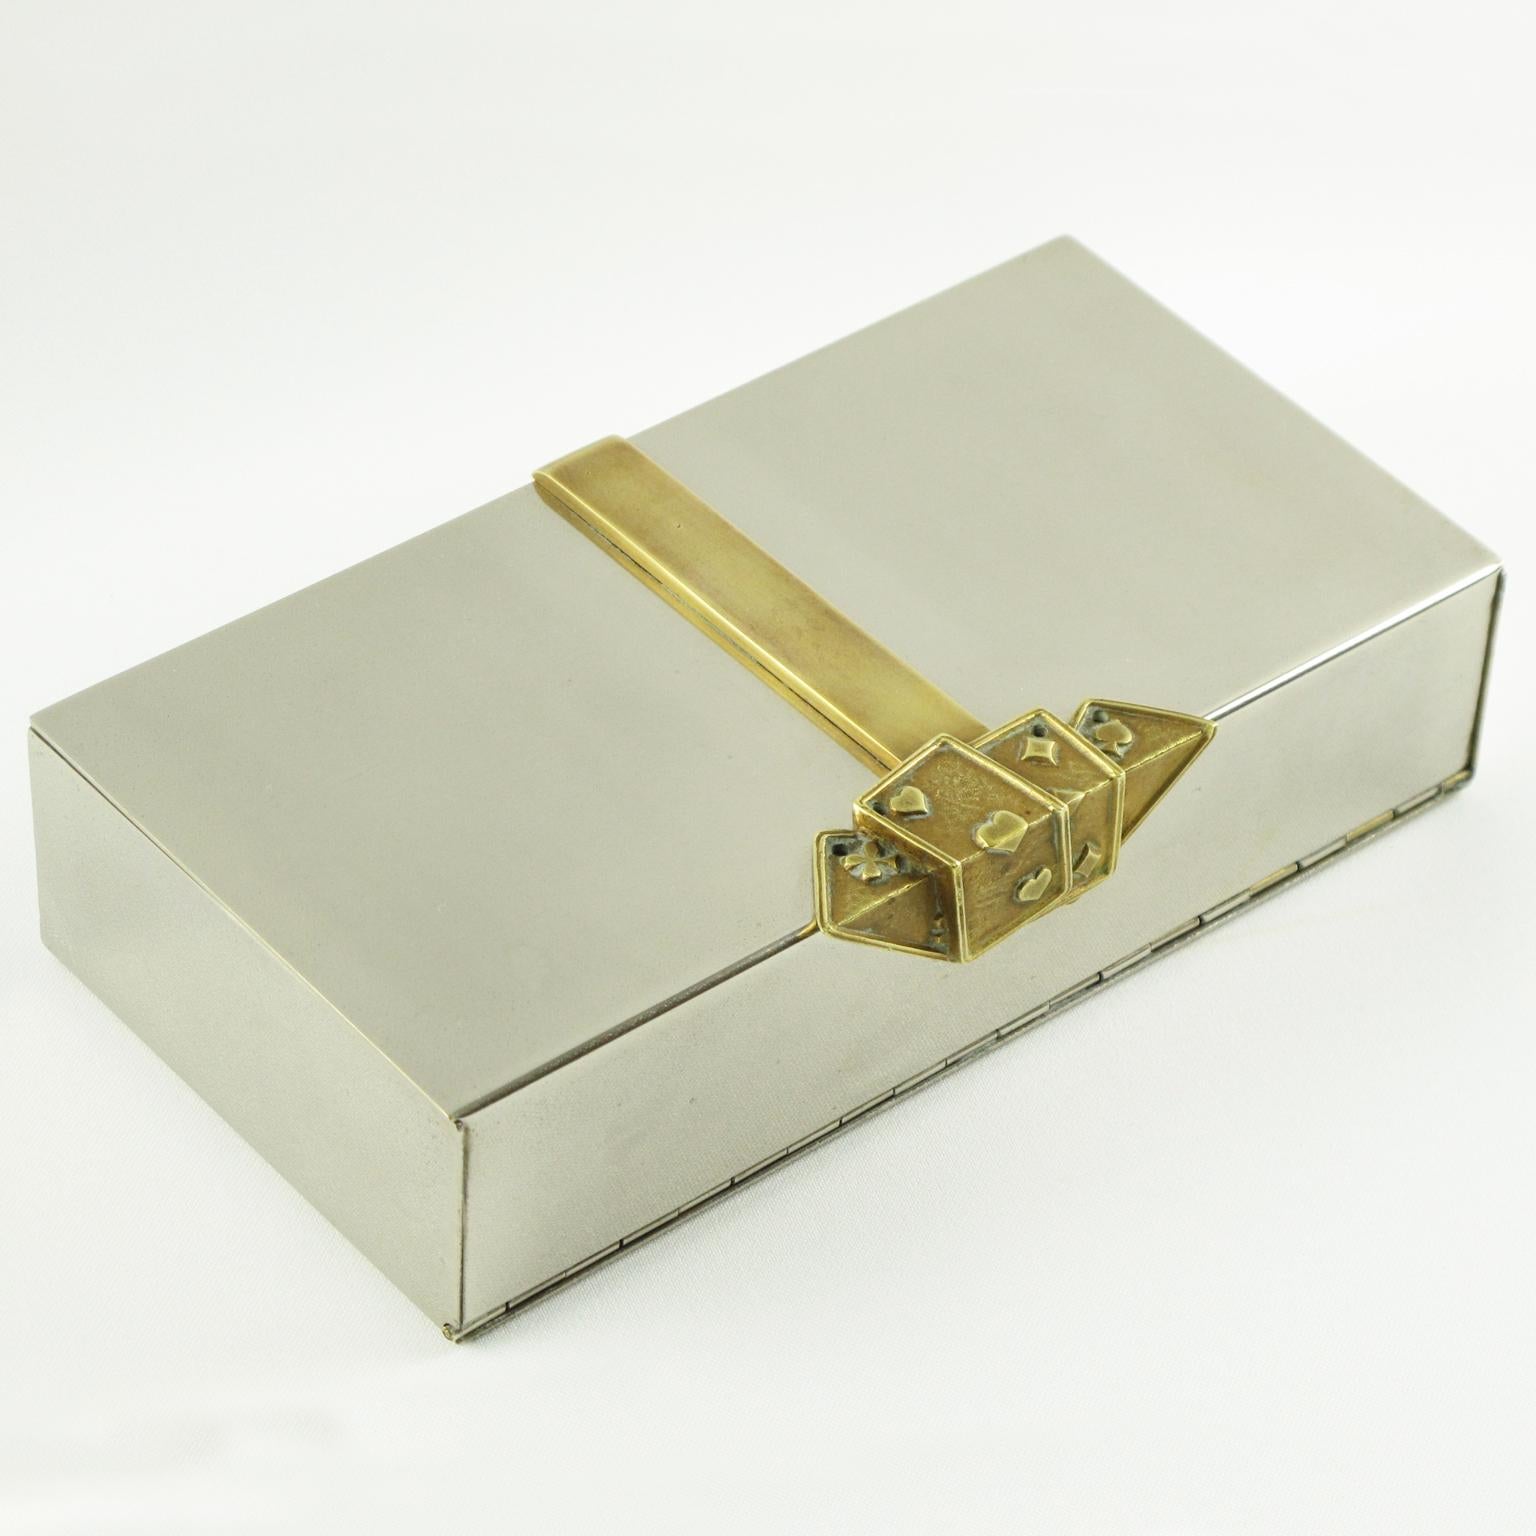 Elegant modernist 1960s stainless steel and brass decorative box reminiscent of French designer Maria Pergay's work. Streamline rectangular shape with brass accent featuring gambling cards. Interior in wood with folding opening. No visible maker's